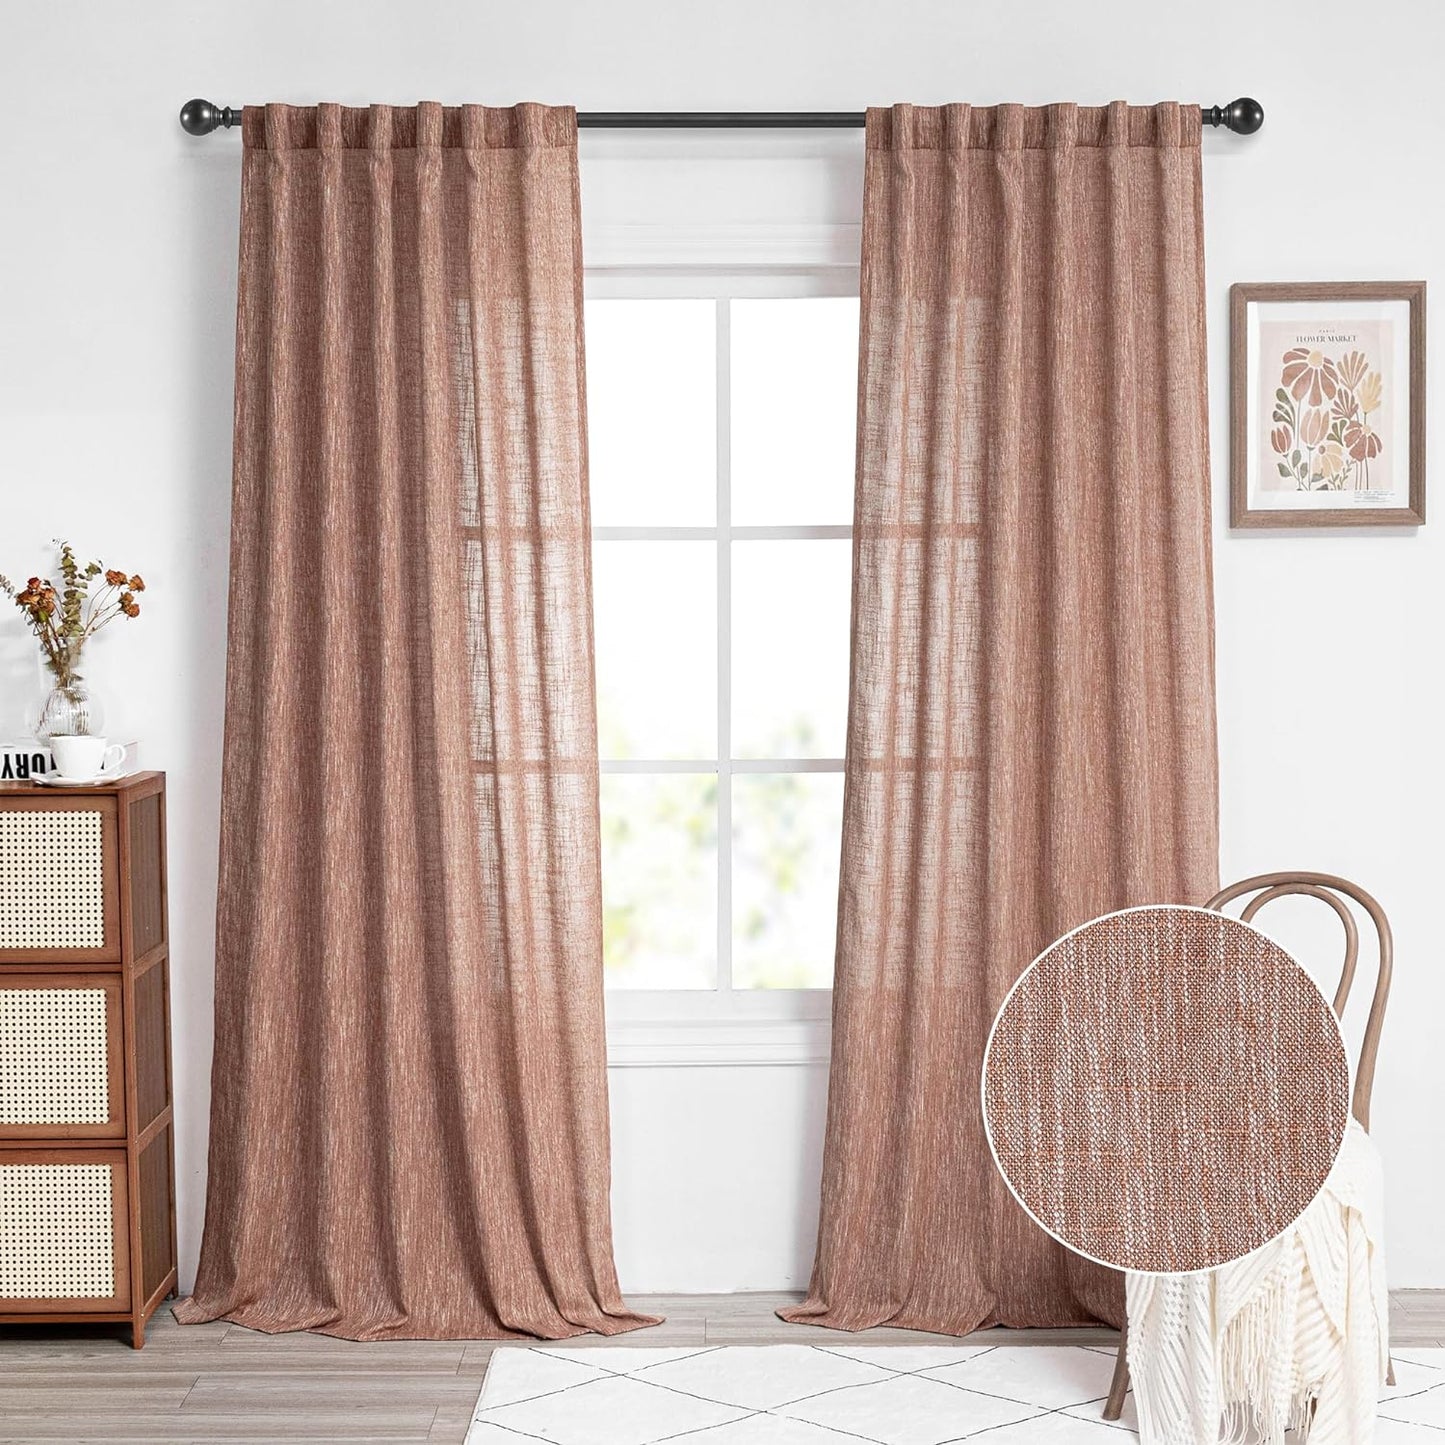 MYSKY HOME 90 Inch Curtains for Sliding Glass Door Windows, Living Room Decoration Cotton Drapes Soft Comfortable Touch Farmhouse Country Patio Treatment Set, 50" Width, Natural, 2 Panels  MYSKYTEX Brick Red 50"W X 108"L 